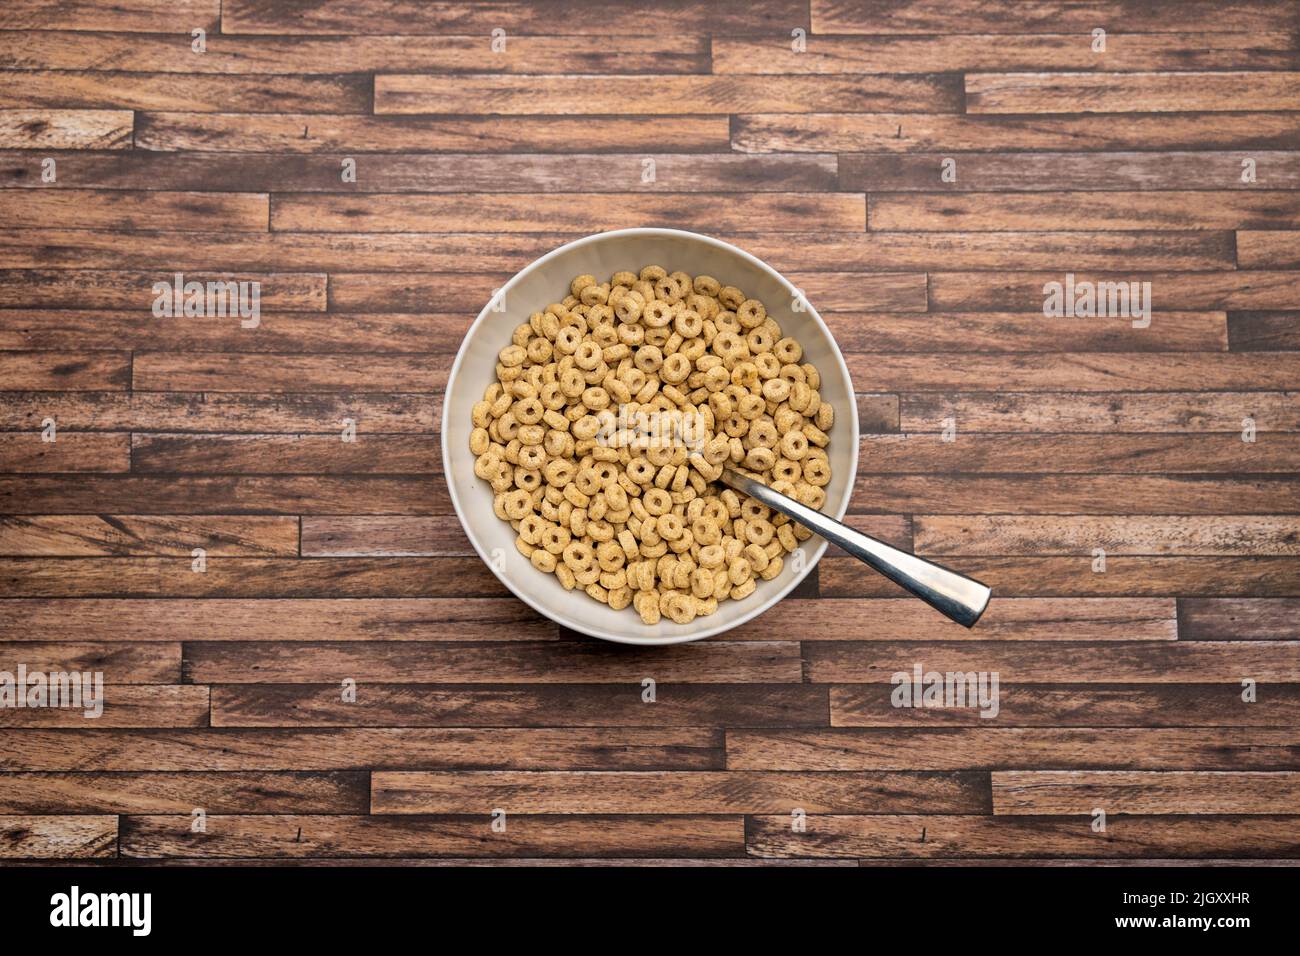 Cereals in a white bowl with a spoon on a wooden table. Round cornflakes for breakfast. Looking down from above. Delicious wheat loops are a snack. Stock Photo